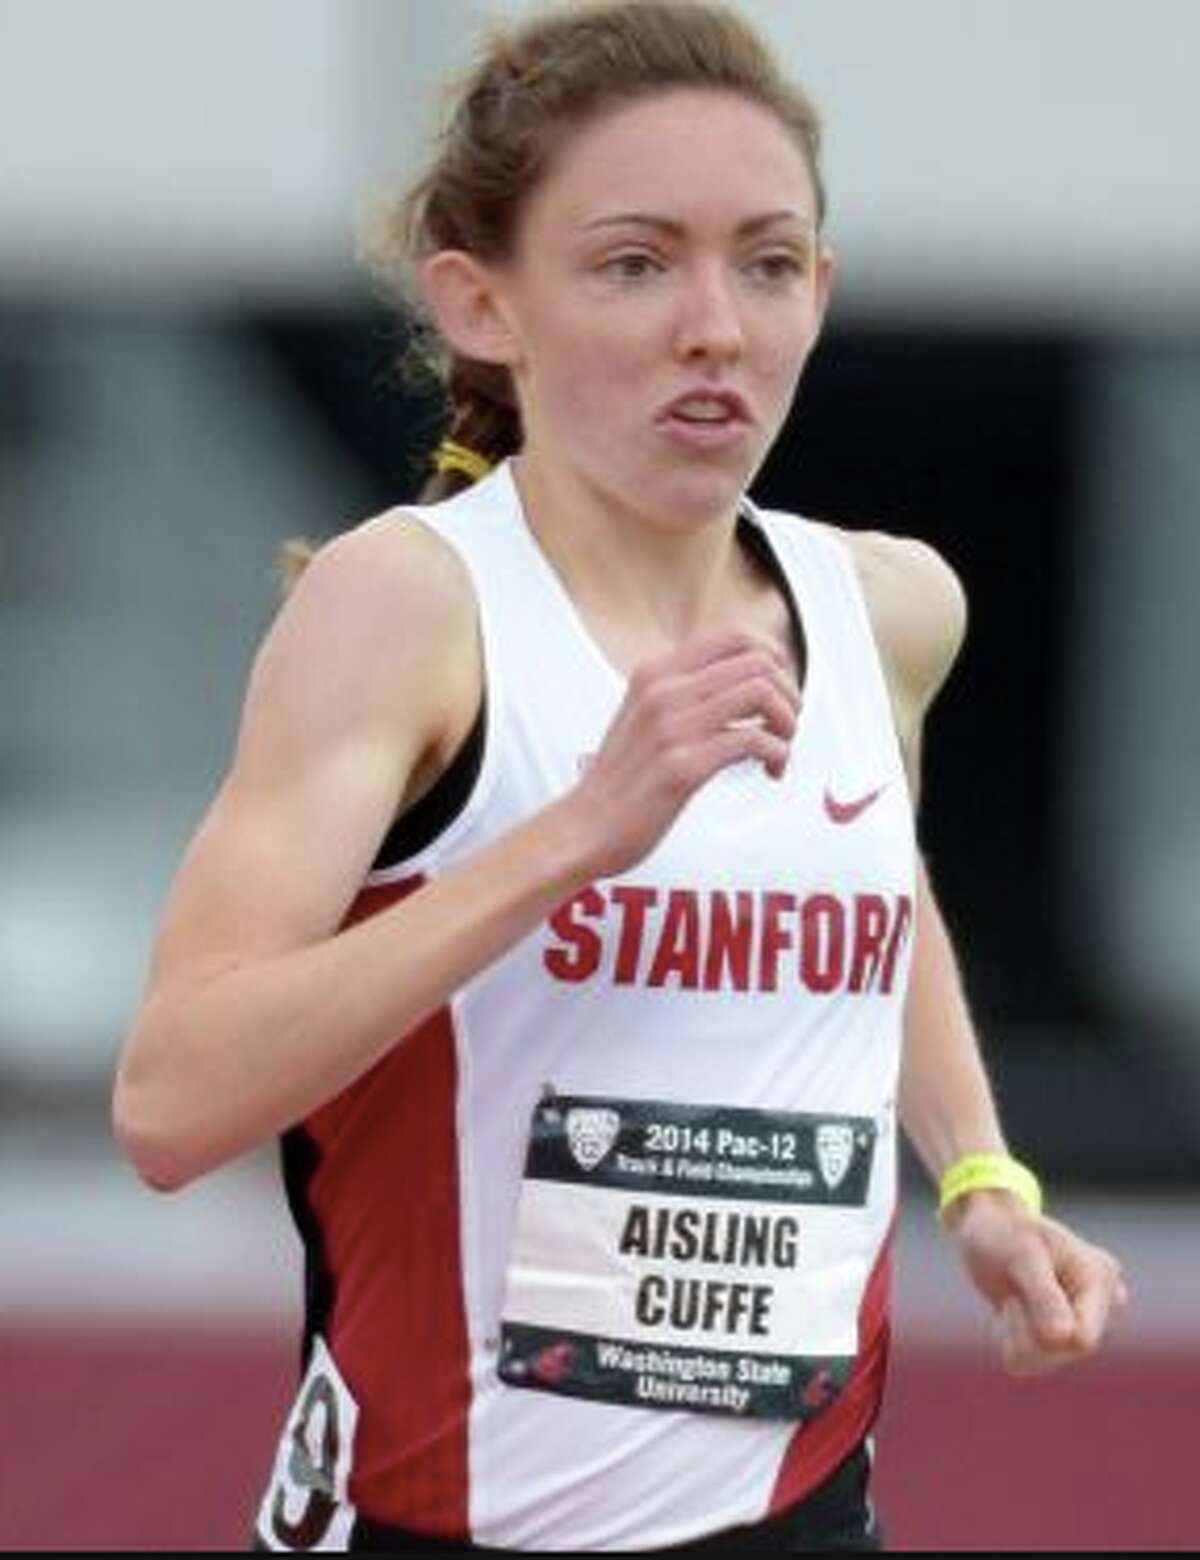 Aisling Cuffe was coached by Holy Names graduate Elizabeth Maloy DeBole. Both are running in the Freihofer's Run for Women.